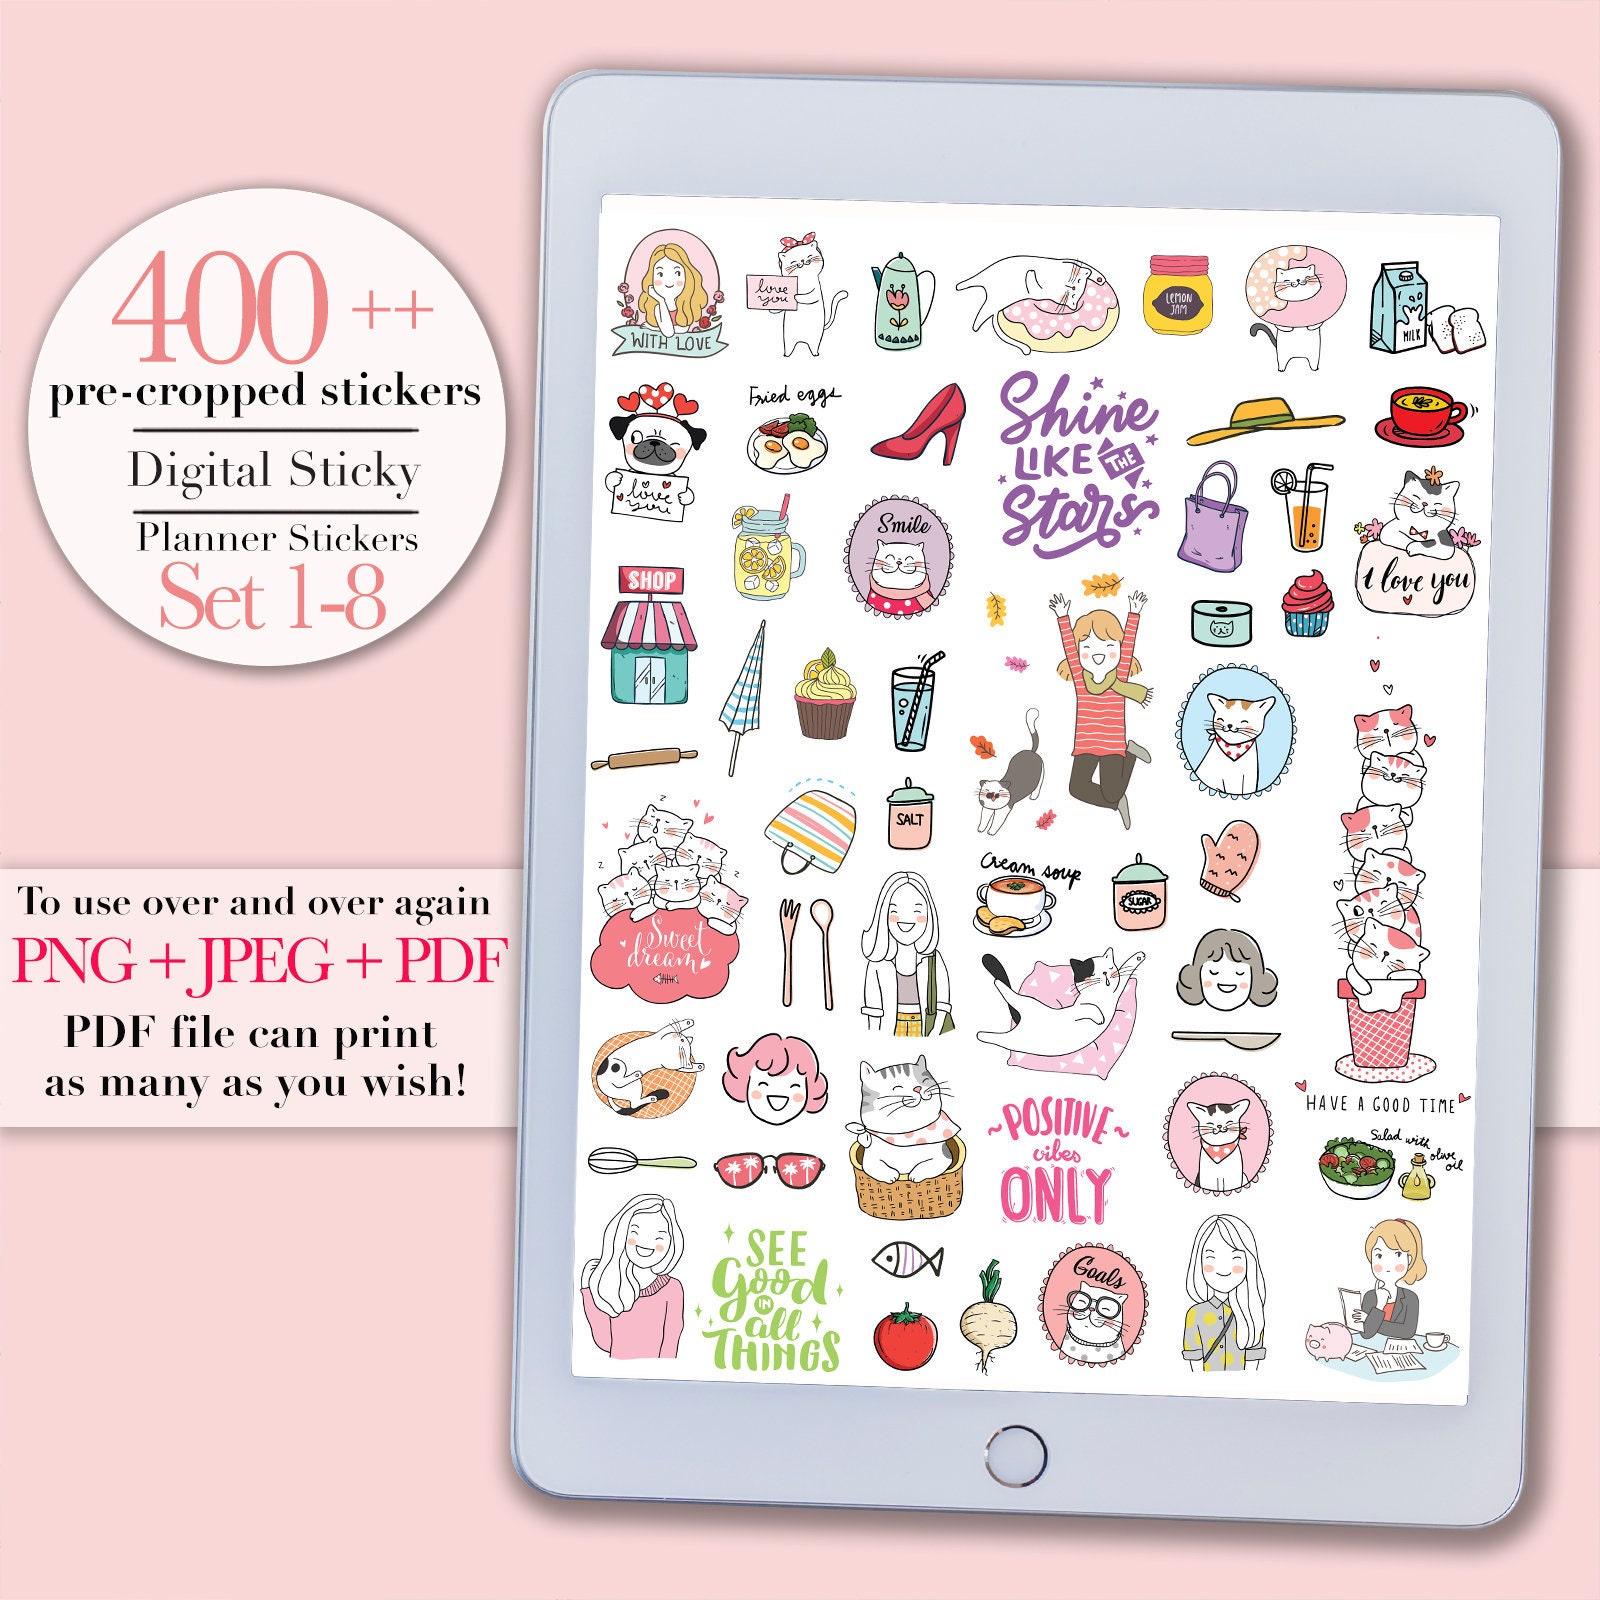 Digital Stickers| iPad Planning Pre- Cropped Planner Stickers Goodnotes Planner Stickers Cute stickers PNGs